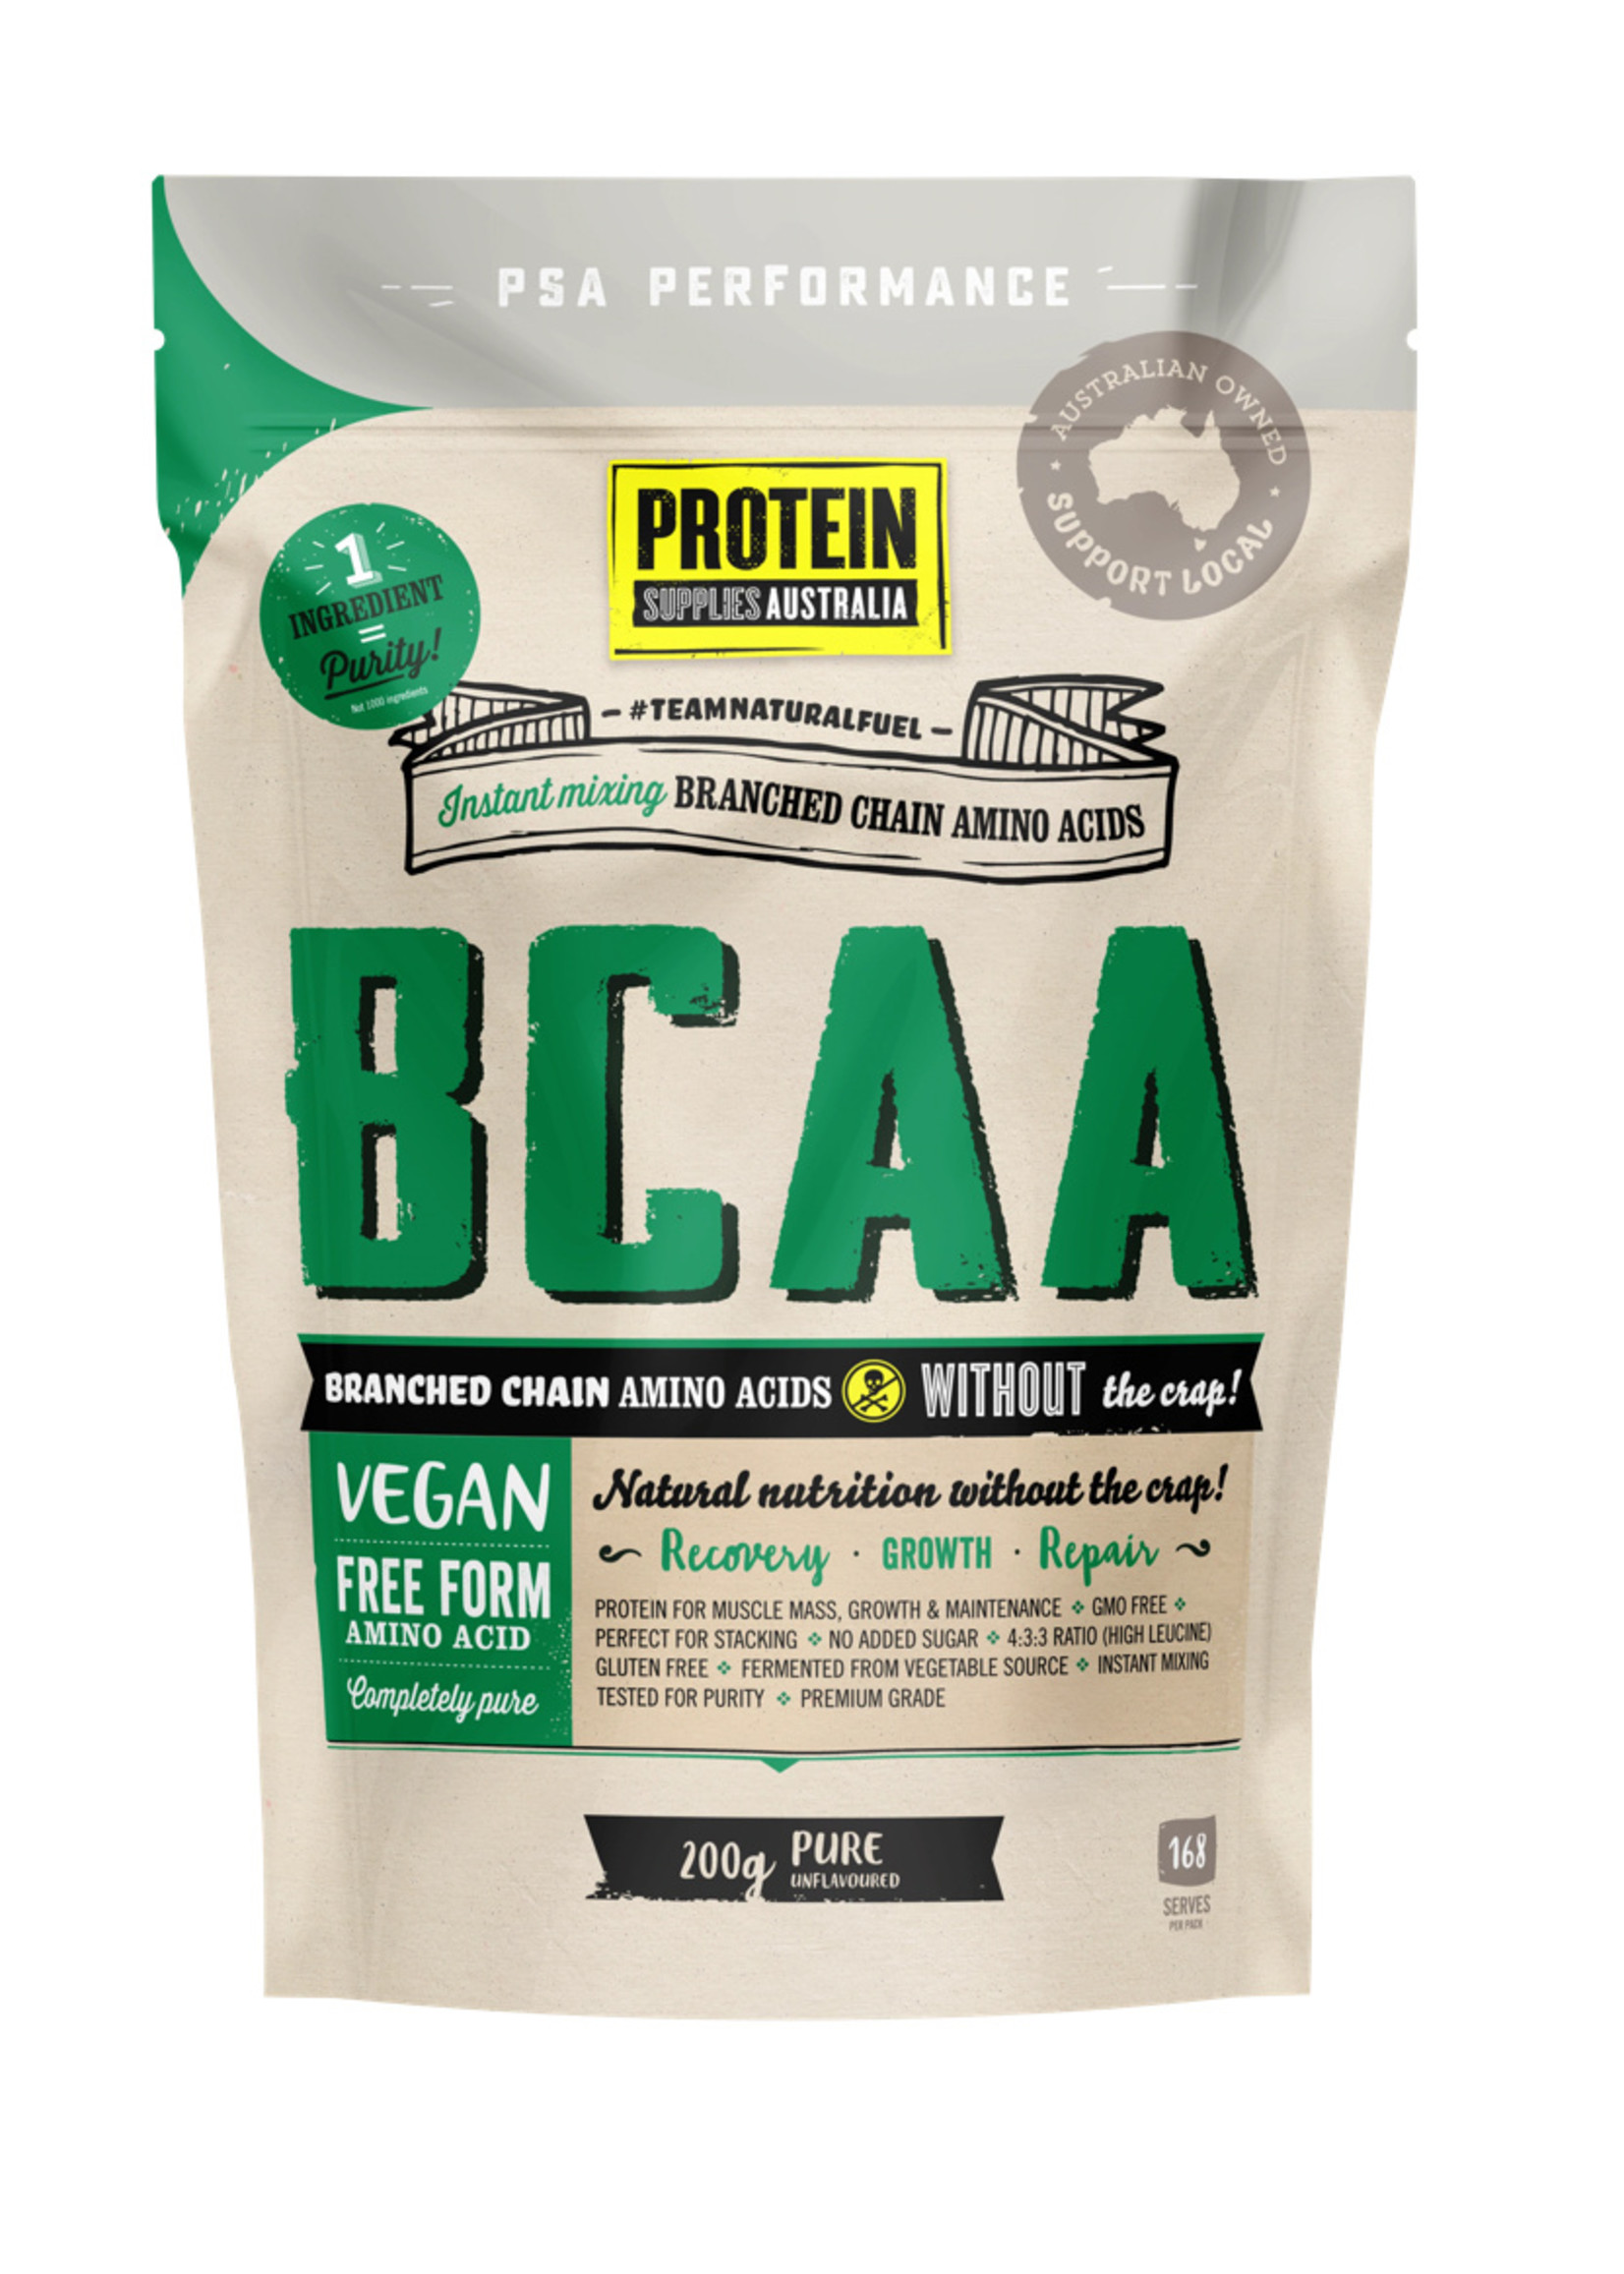 PROTEIN SUPPLIES AUST. Protein Supplies Australia BCAA Branched Chain Amino Acids Pure 200g